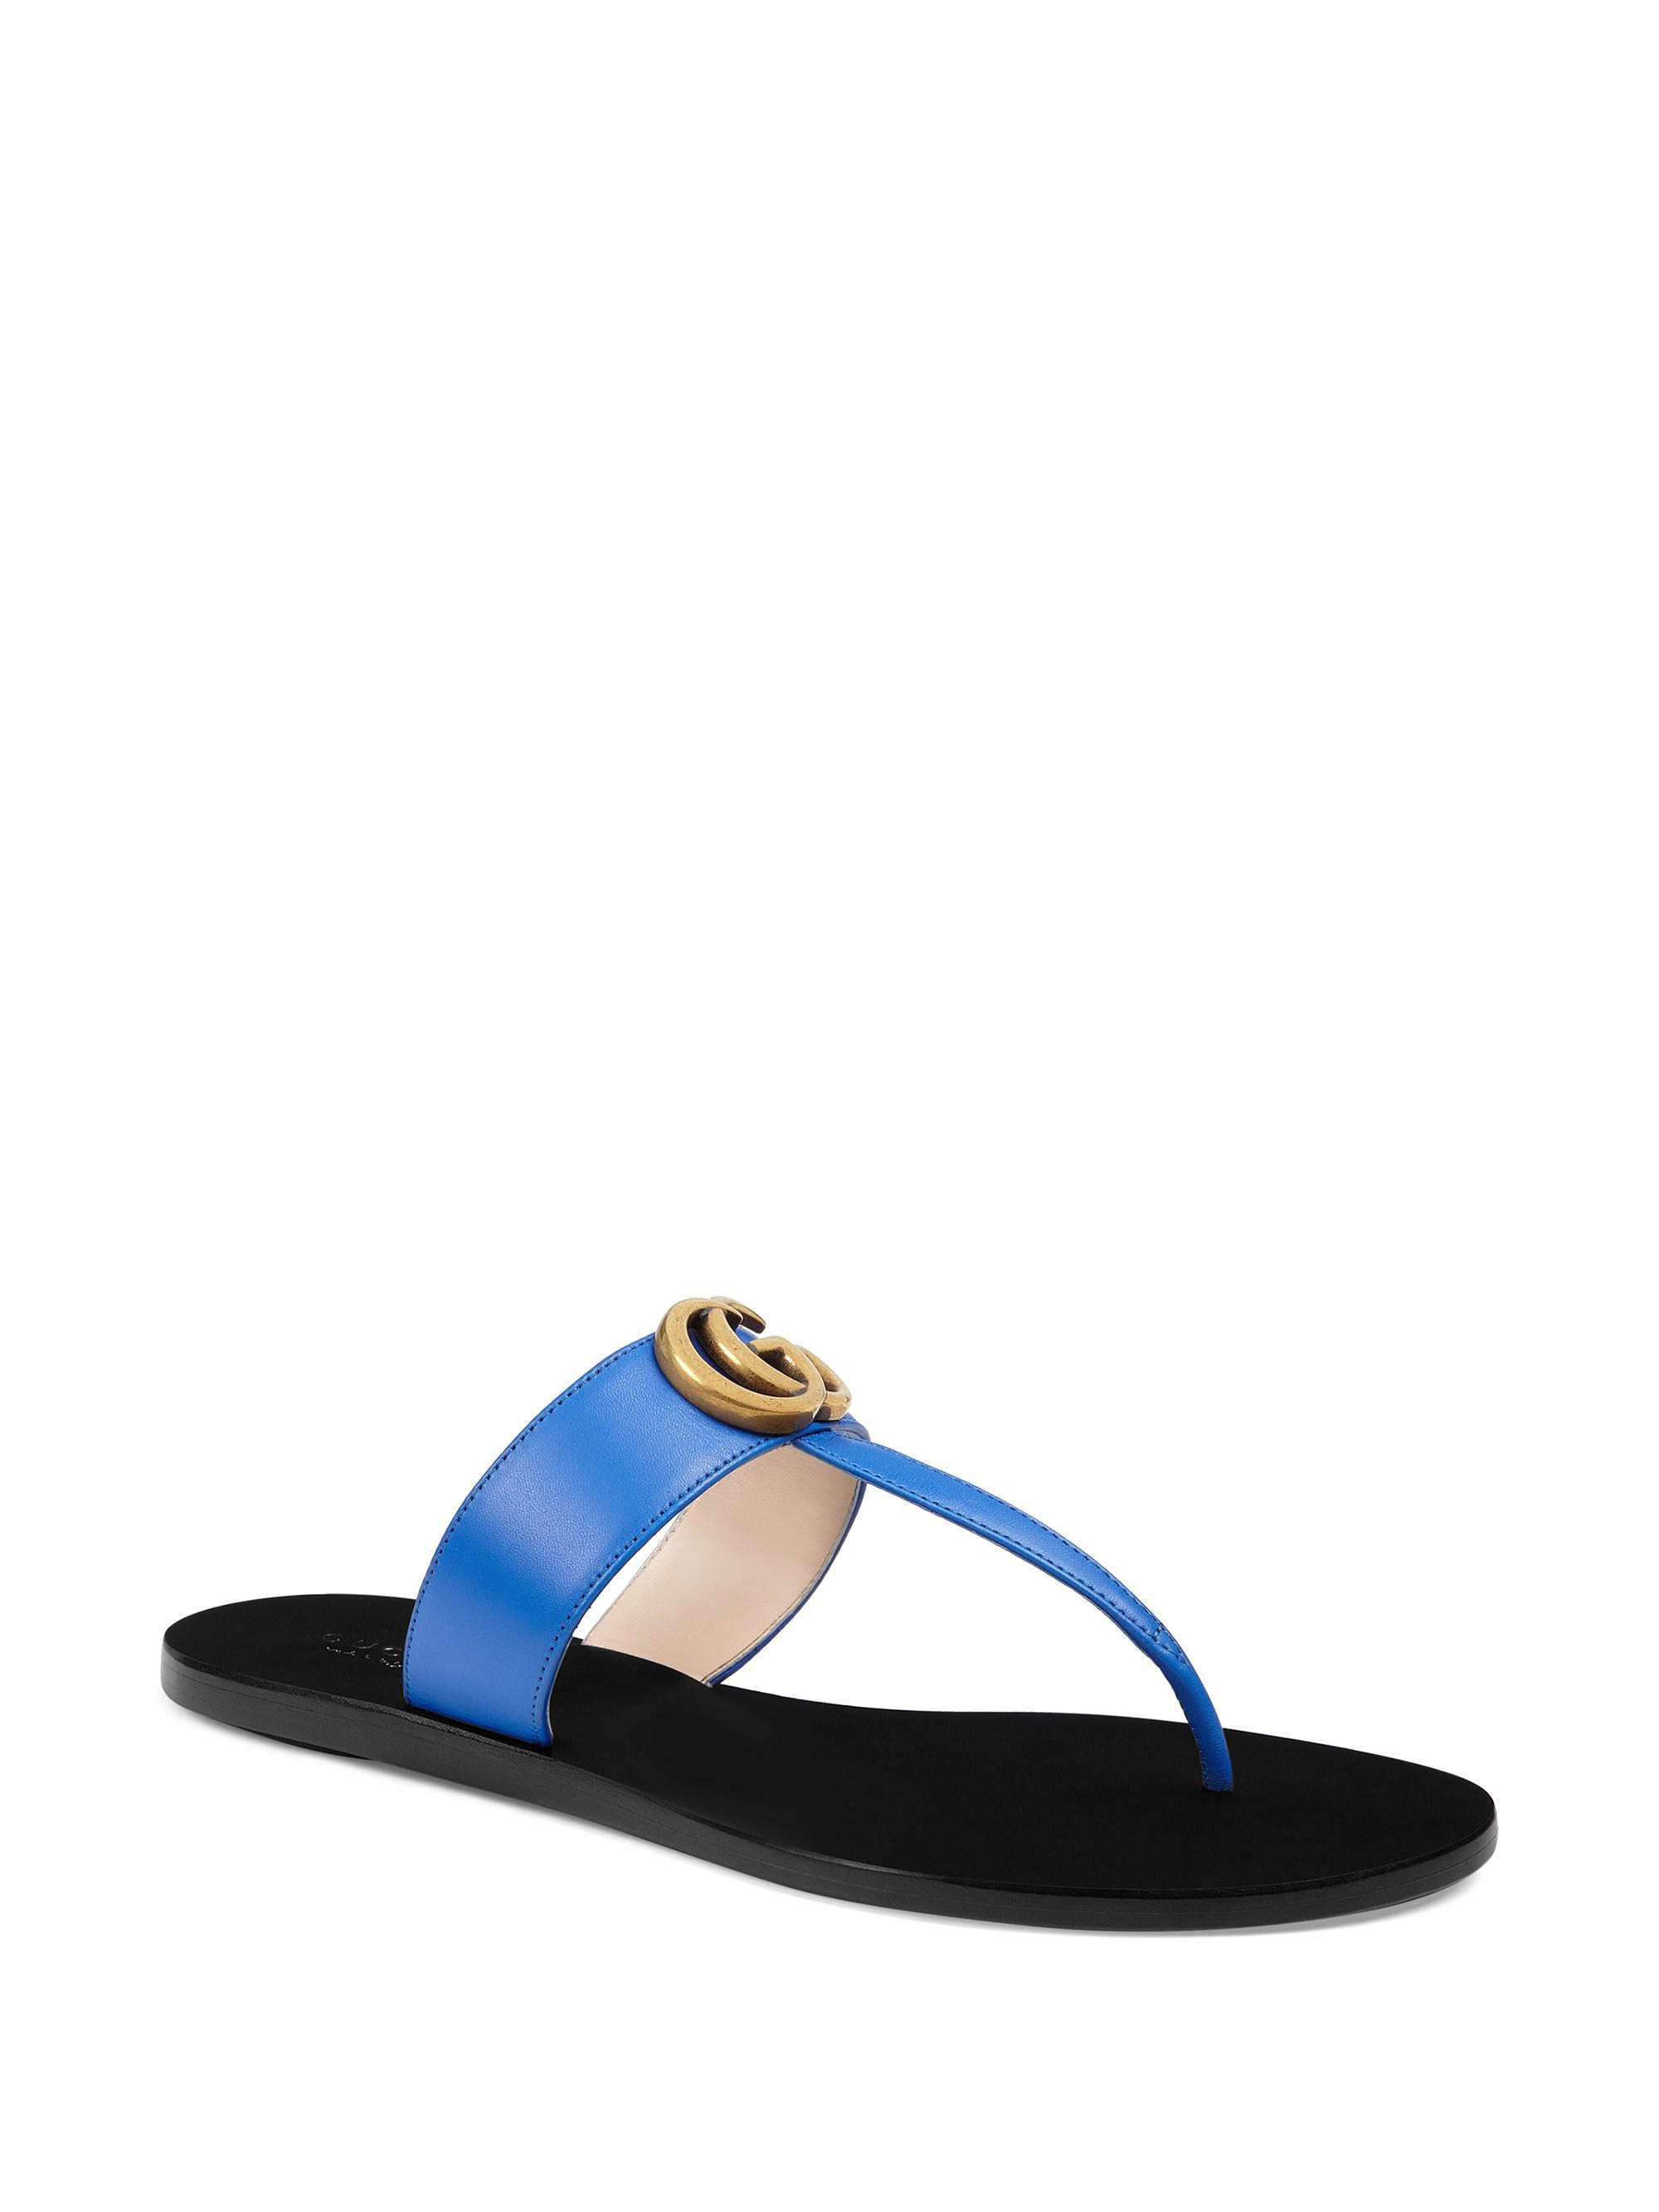 Gucci Marmont Leather Thong Sandals 